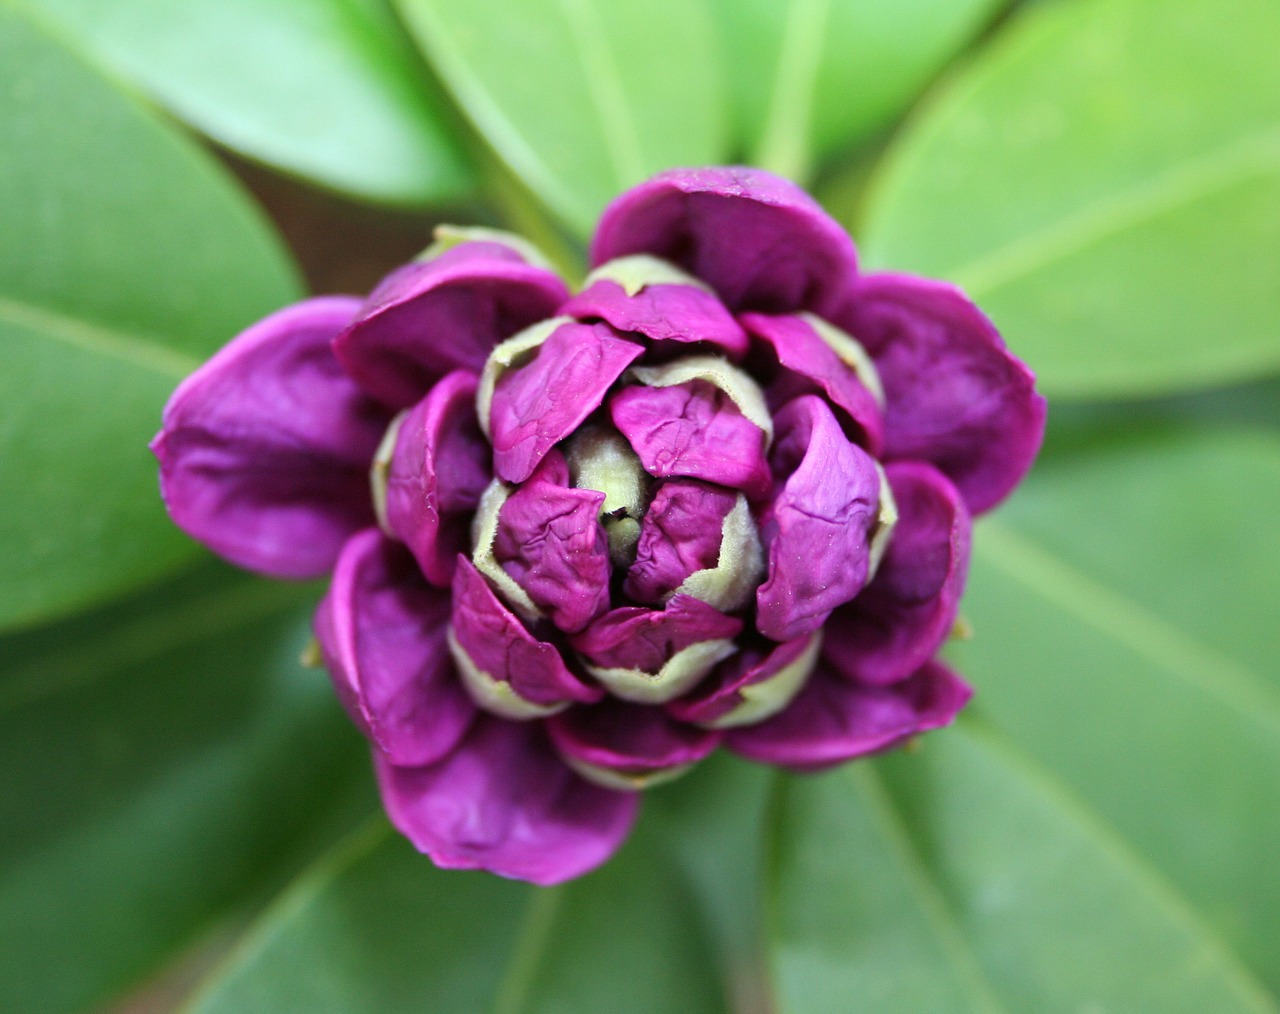 rhododendron flower bud free photo